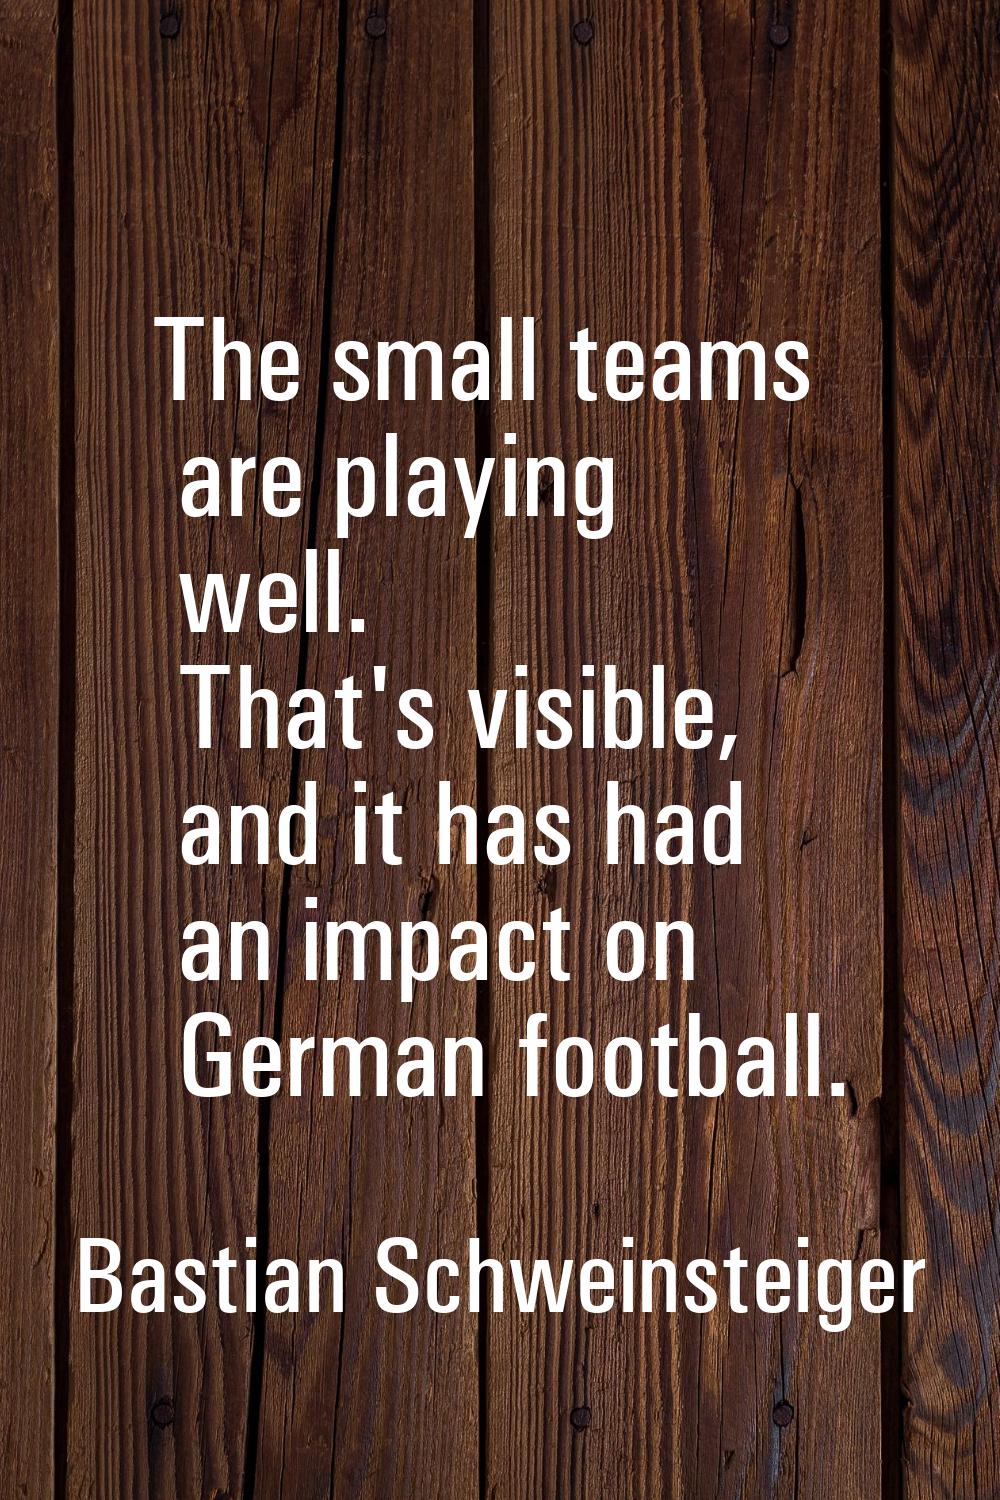 The small teams are playing well. That's visible, and it has had an impact on German football.